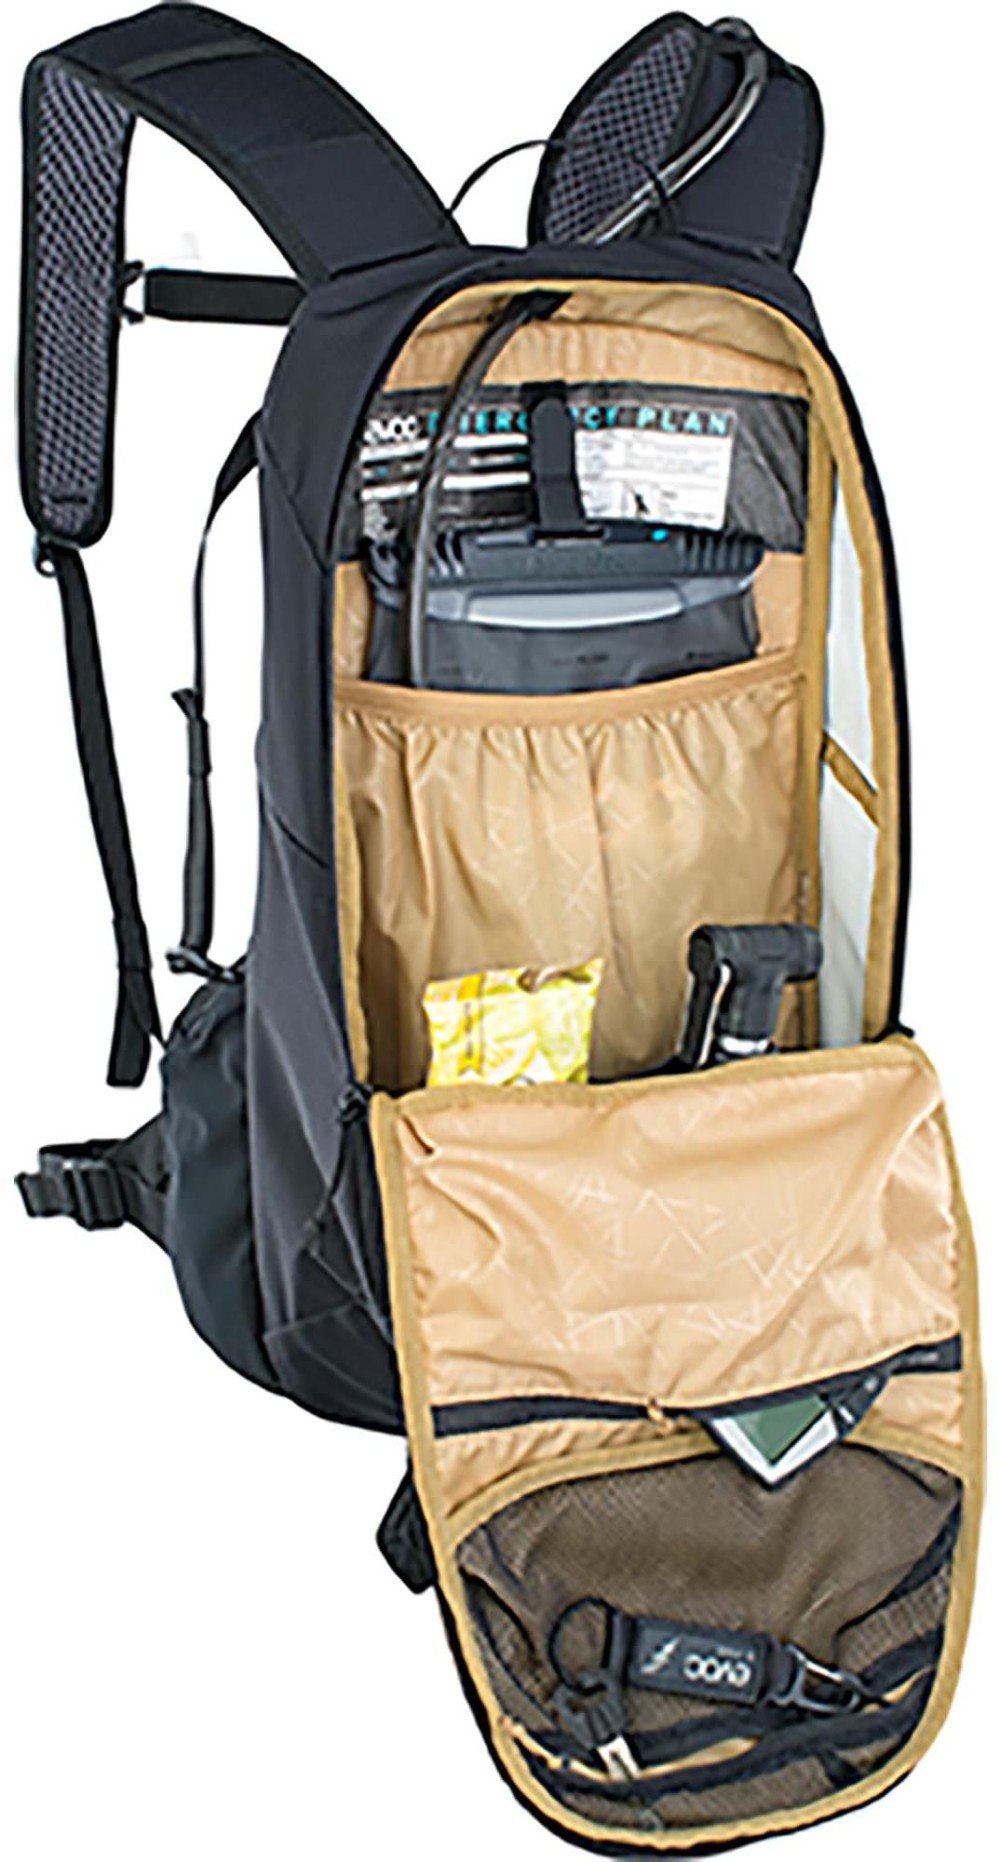 E-Ride 12L Performance Backpack image 2